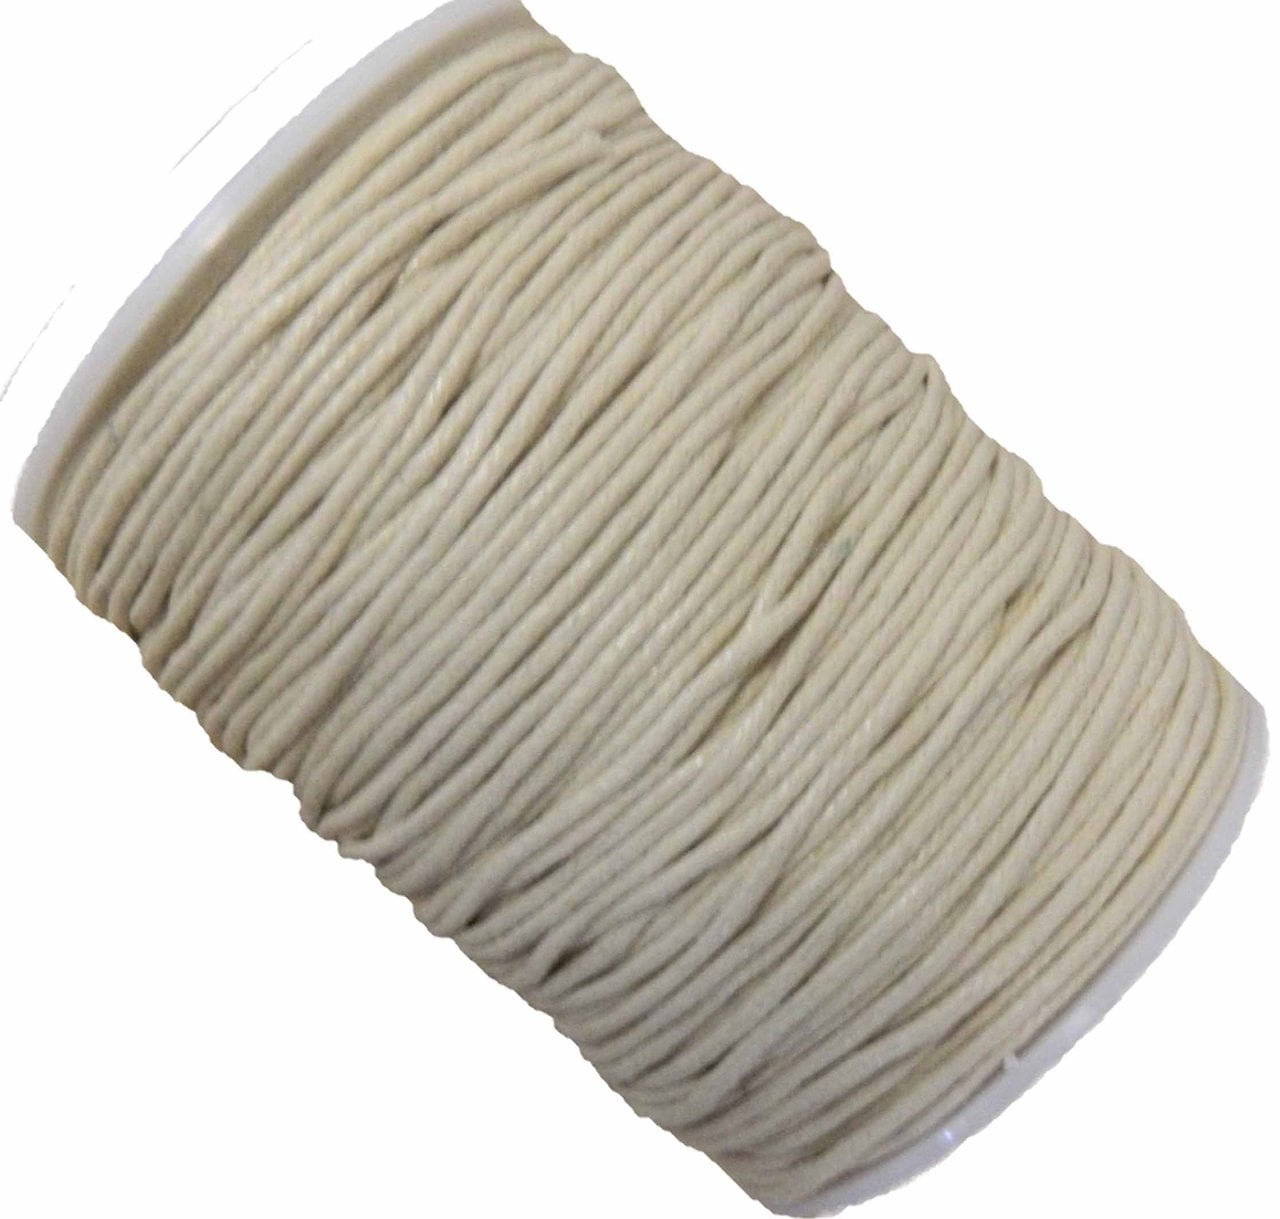 Covered Cording Fibre Wrap Cord Rope Cord 5mm approx Black White Wrapped Thread Rope Cord - 1Yard 92cm 1 piece Fiber Fabric Wrap Cord